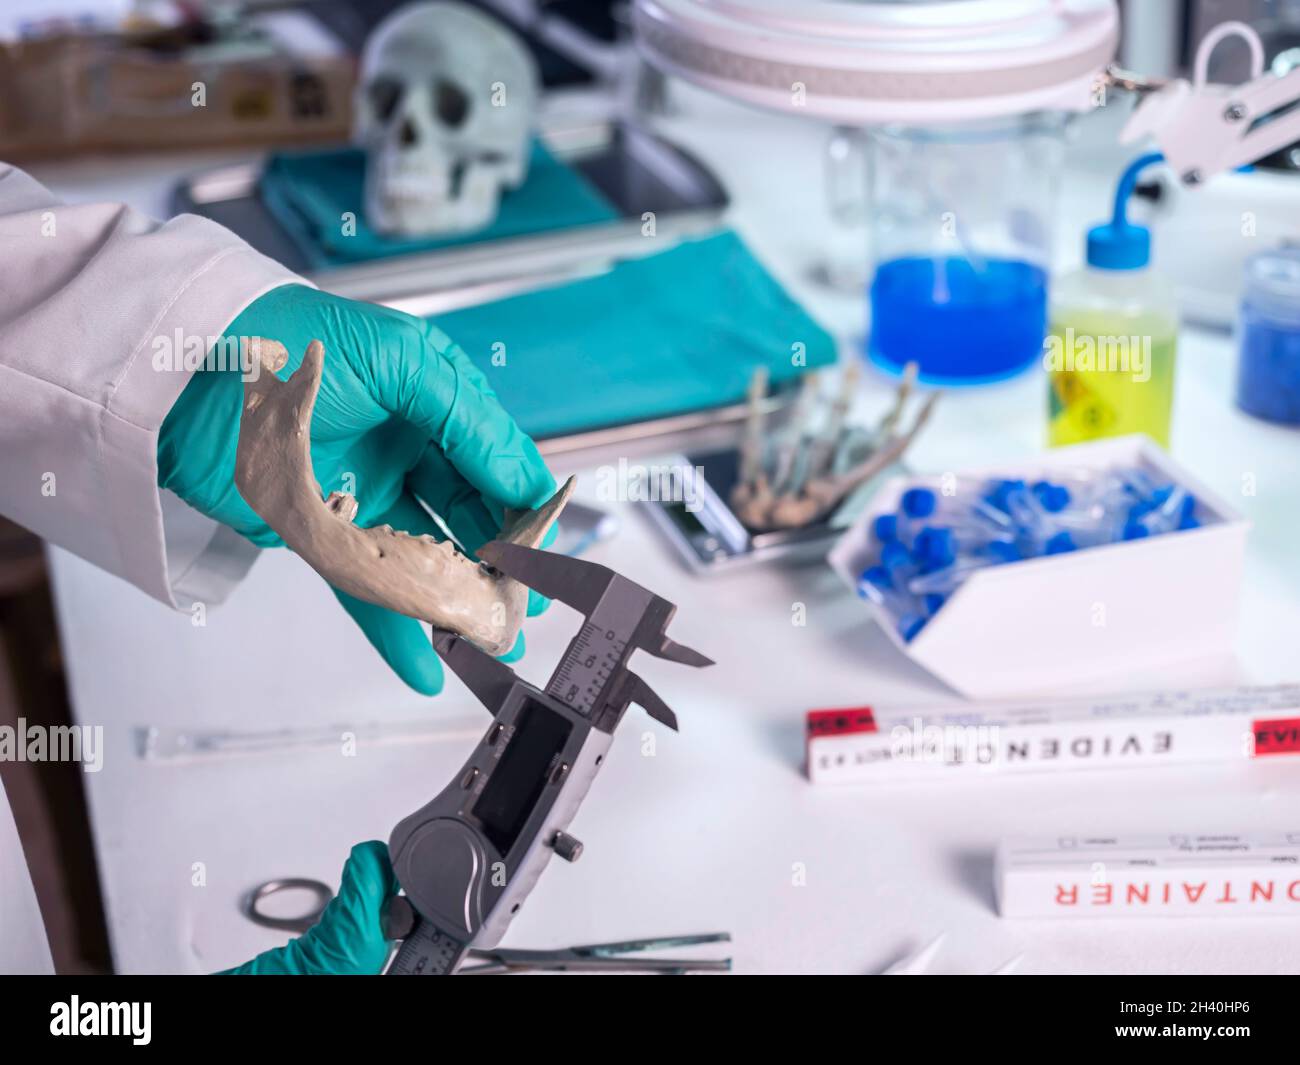 Forensic scientist measures width of lower jaw of murdered adult in crime lab, concept image Stock Photo